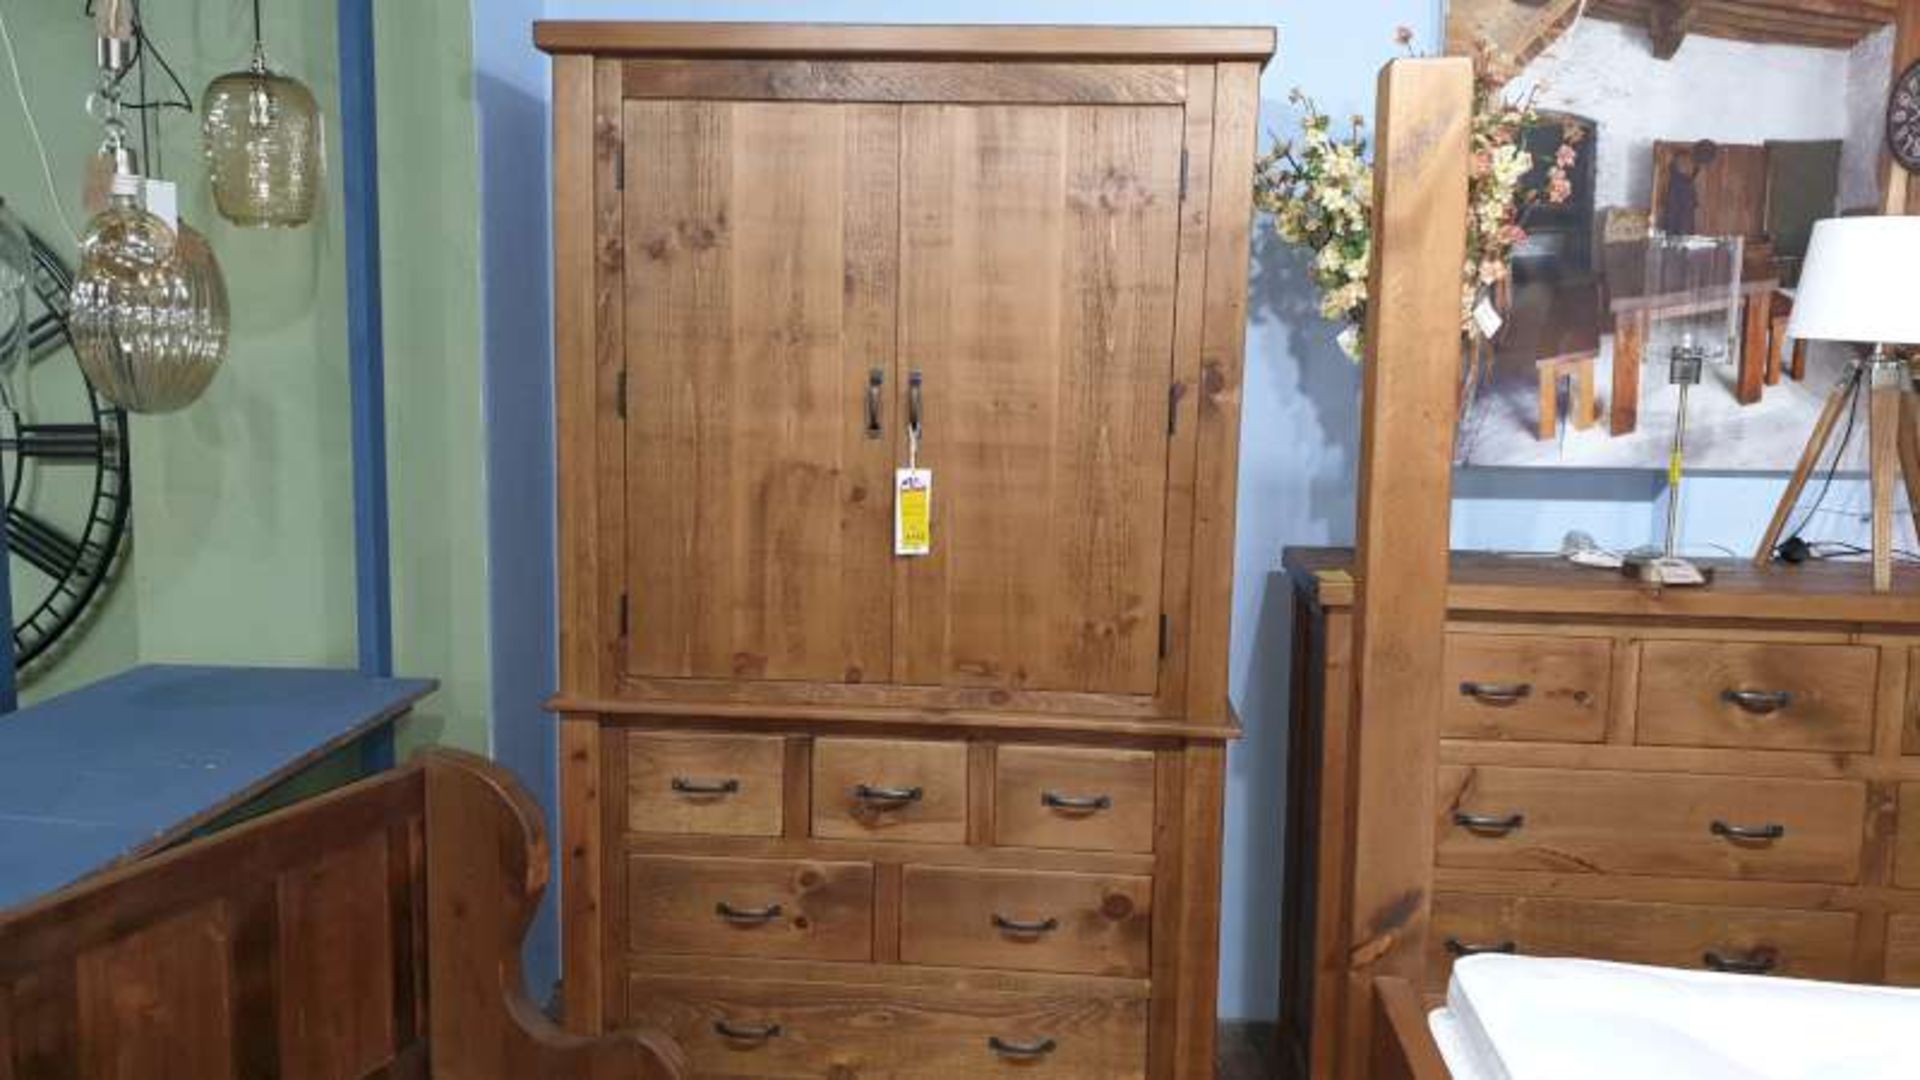 PLANK STYLE WOODEN GENTS WARDROBE WITH UNDERDRAWER STORAGE SIZE L1205MM X W590MM X H1990MM RRP